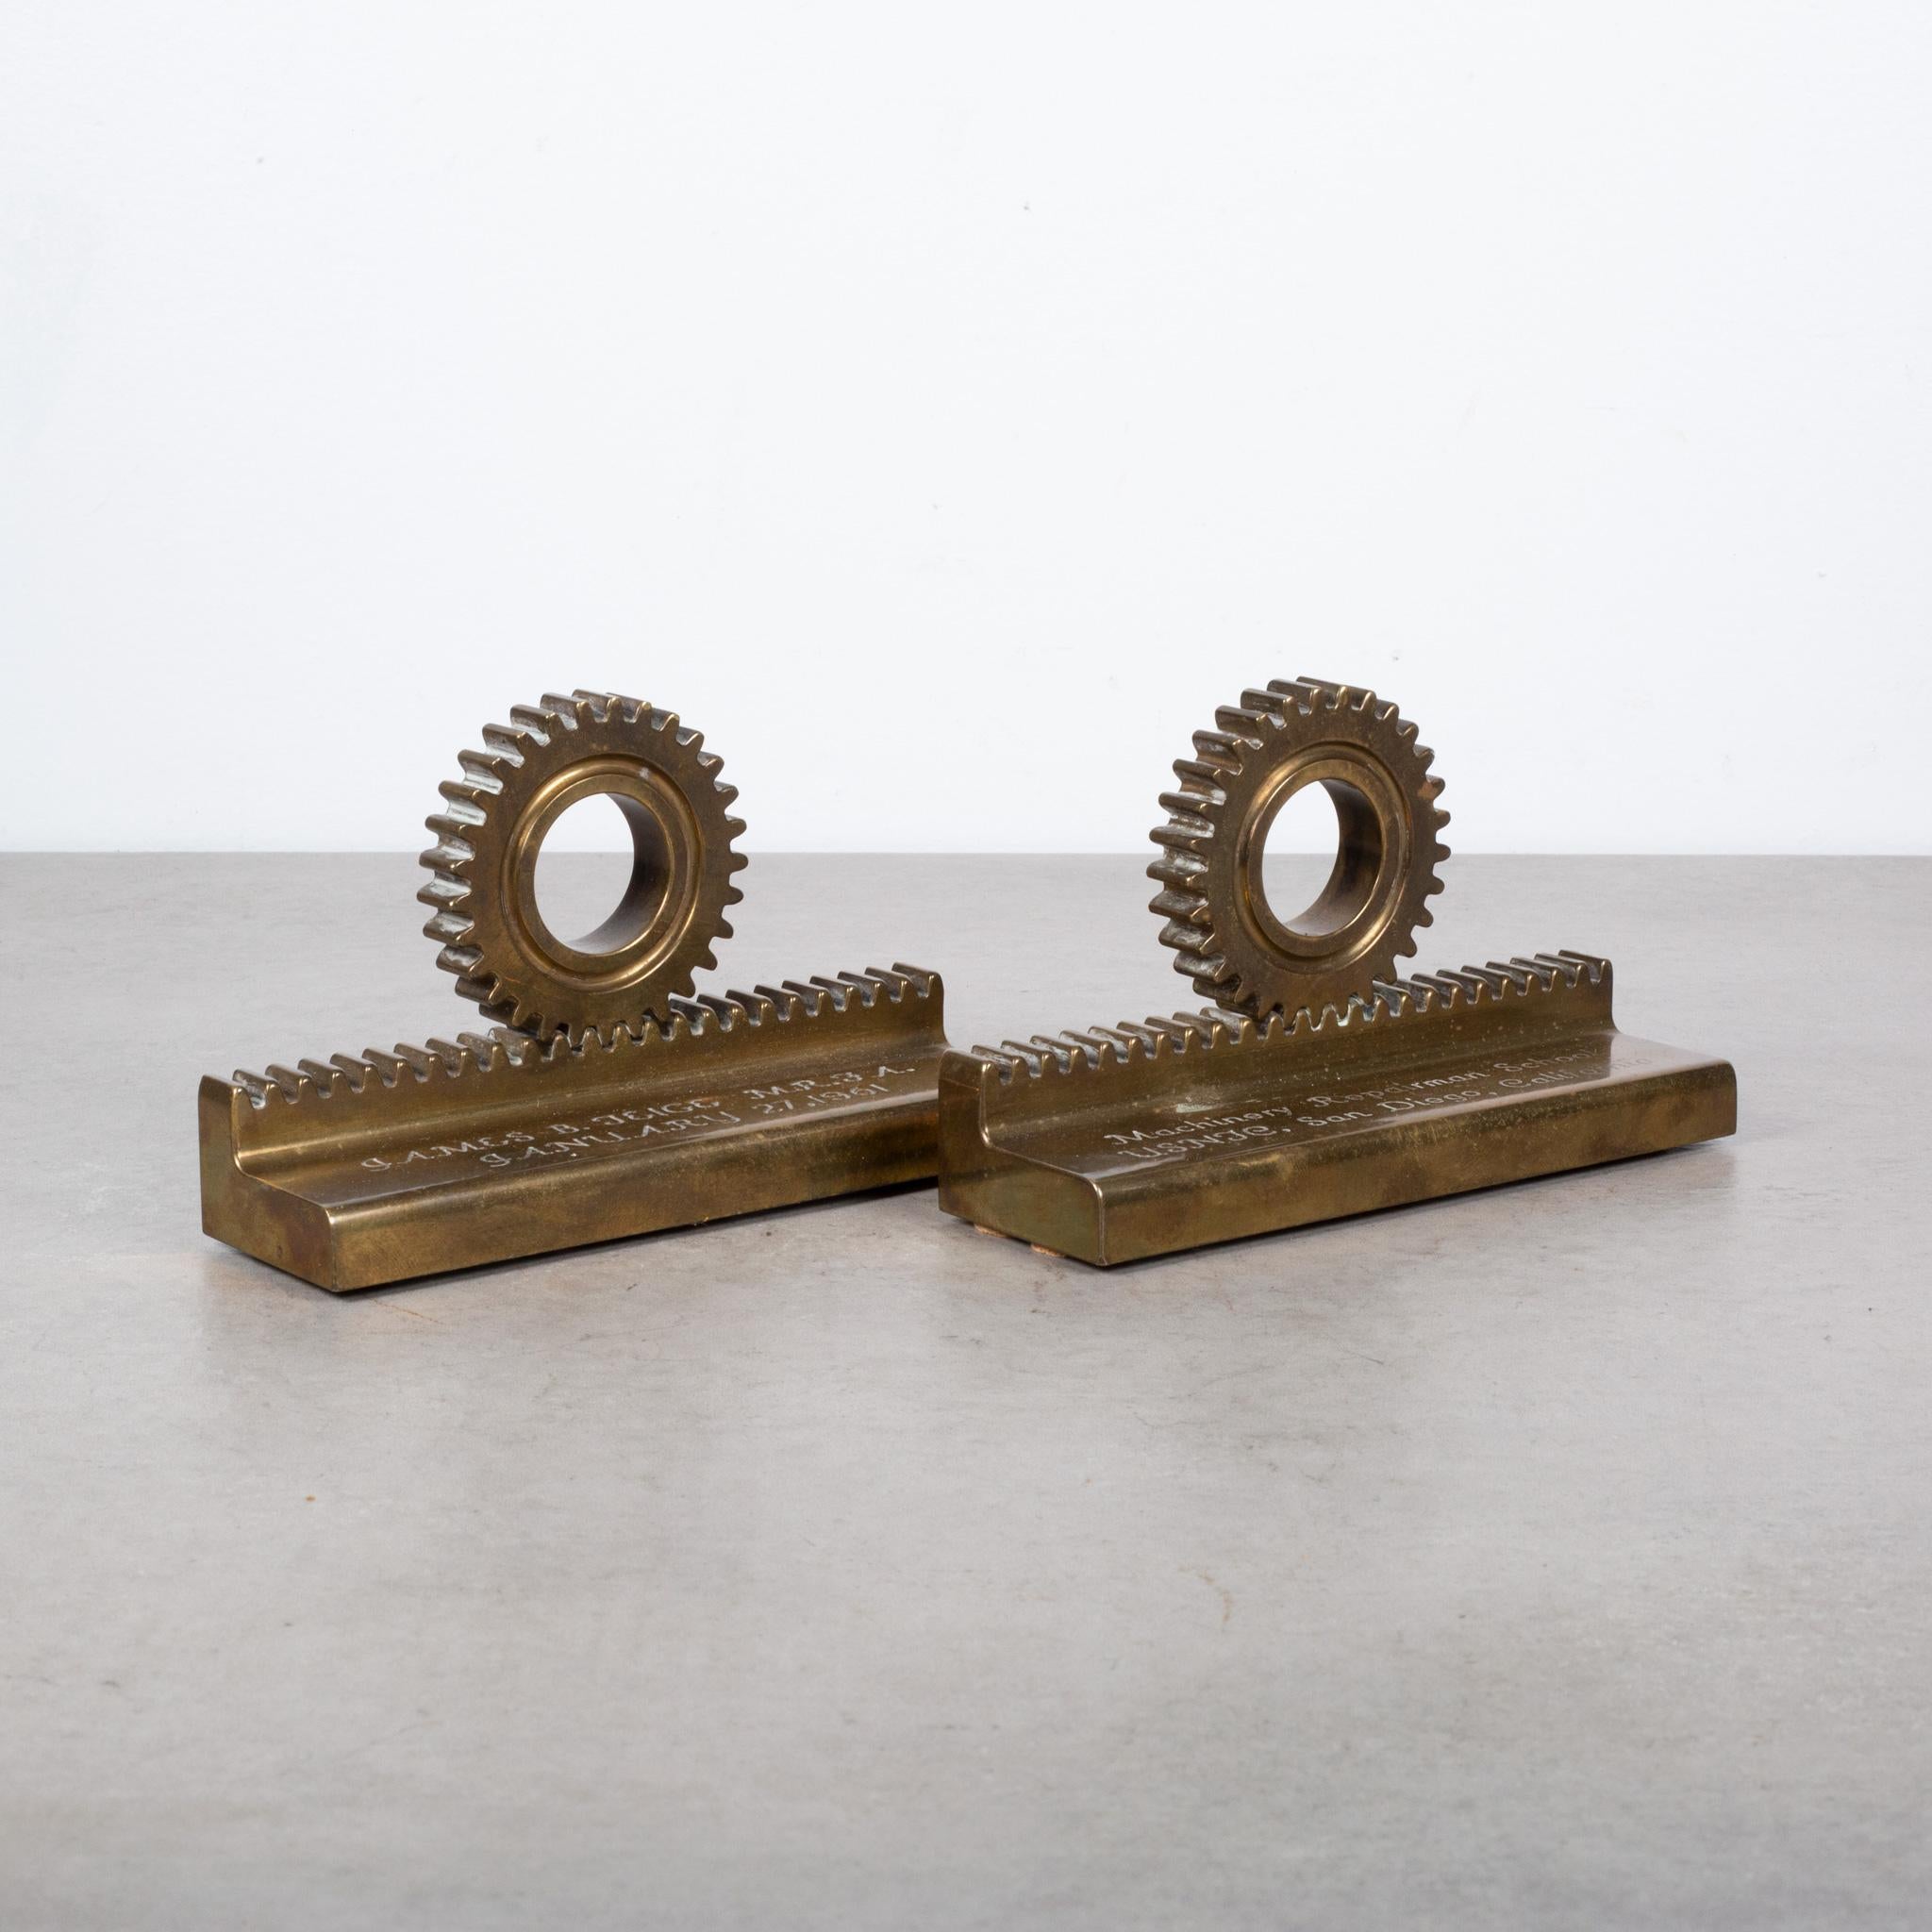 Industrial Midcentury Engraved Solid Bronze Gear Bookends, circa 1961